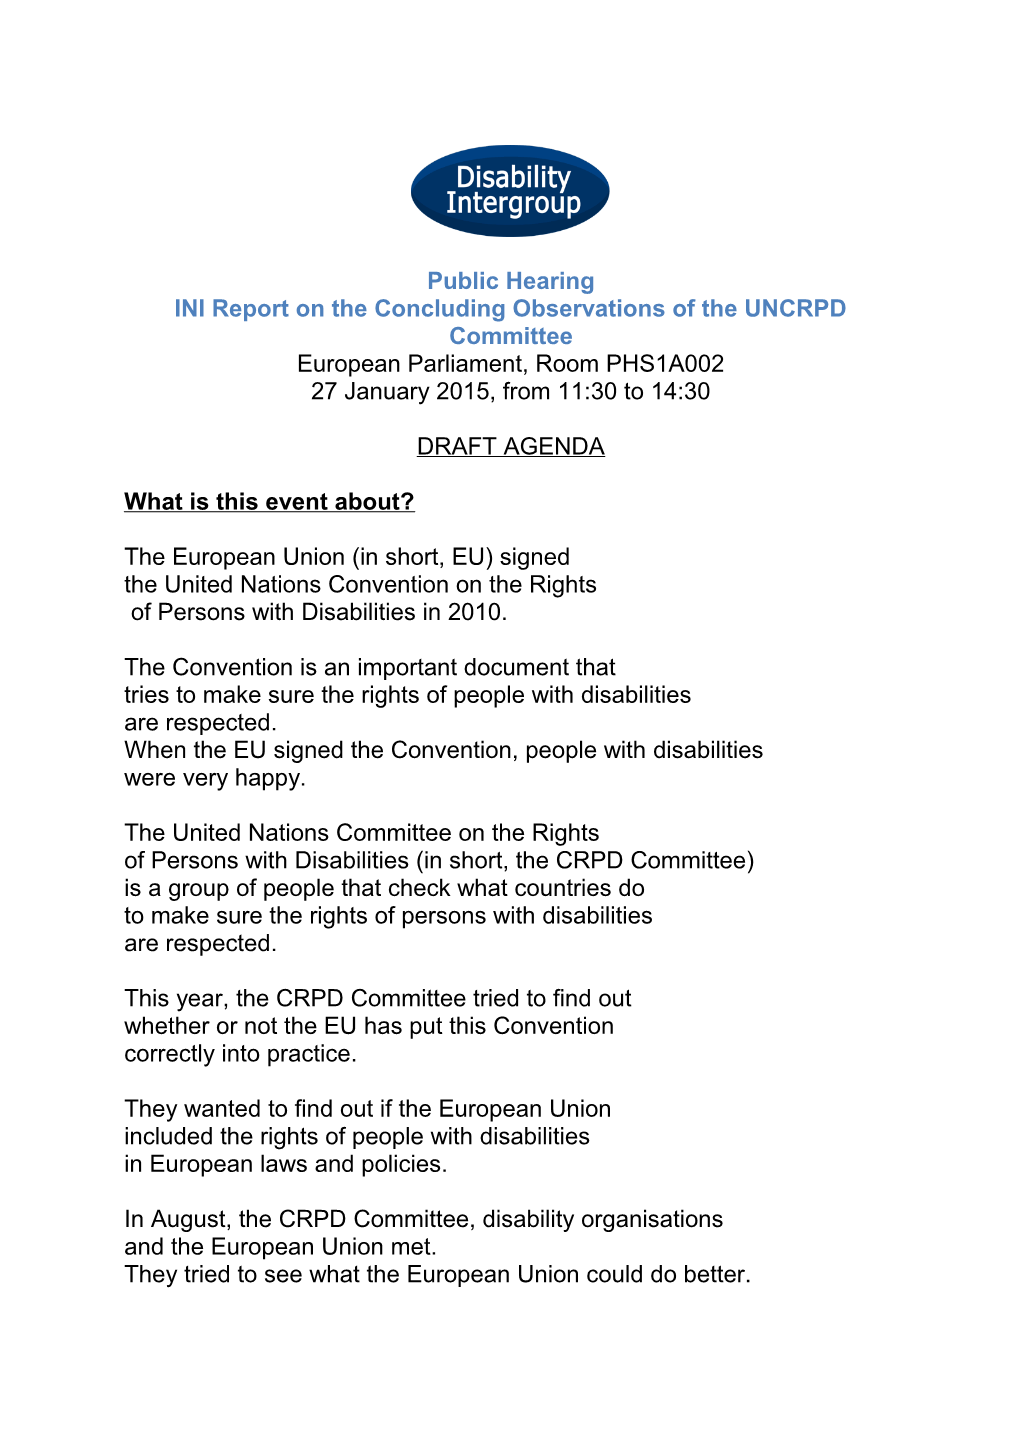 INI Report on the Concluding Observations of the UNCRPD Committee